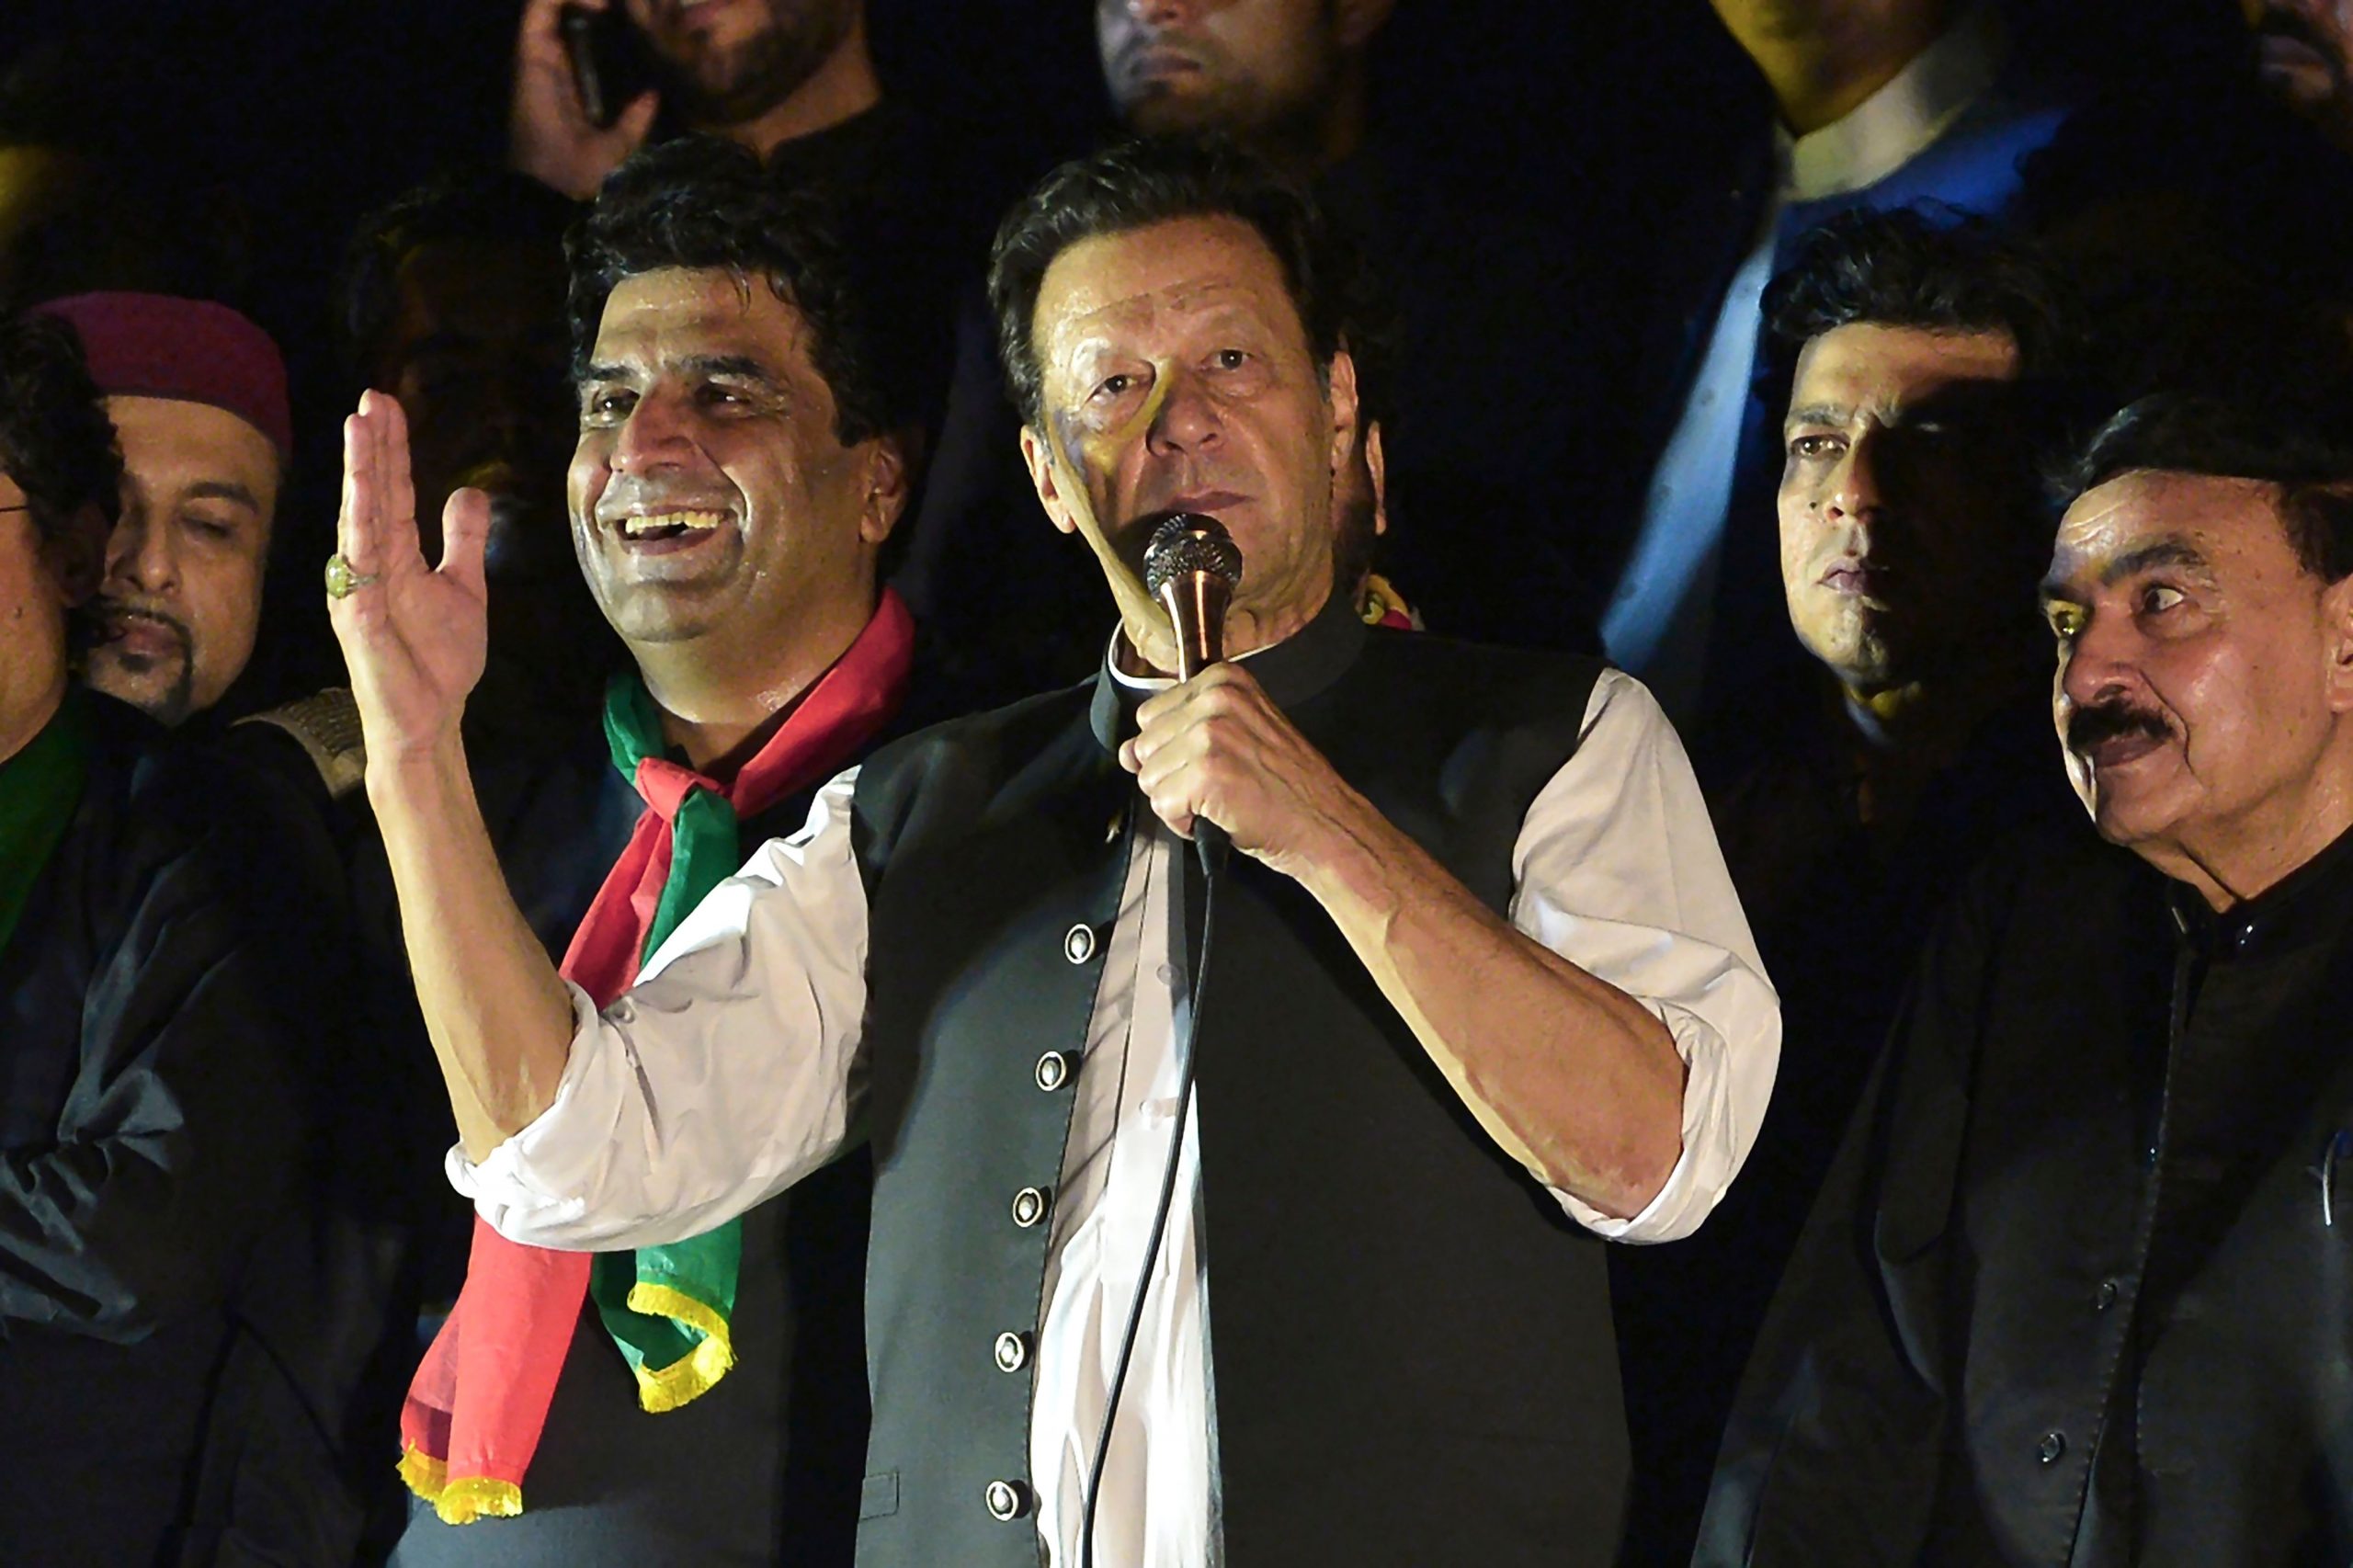 Imran Khan, former Pakistan PM, disqualified from holding public office for 5 years